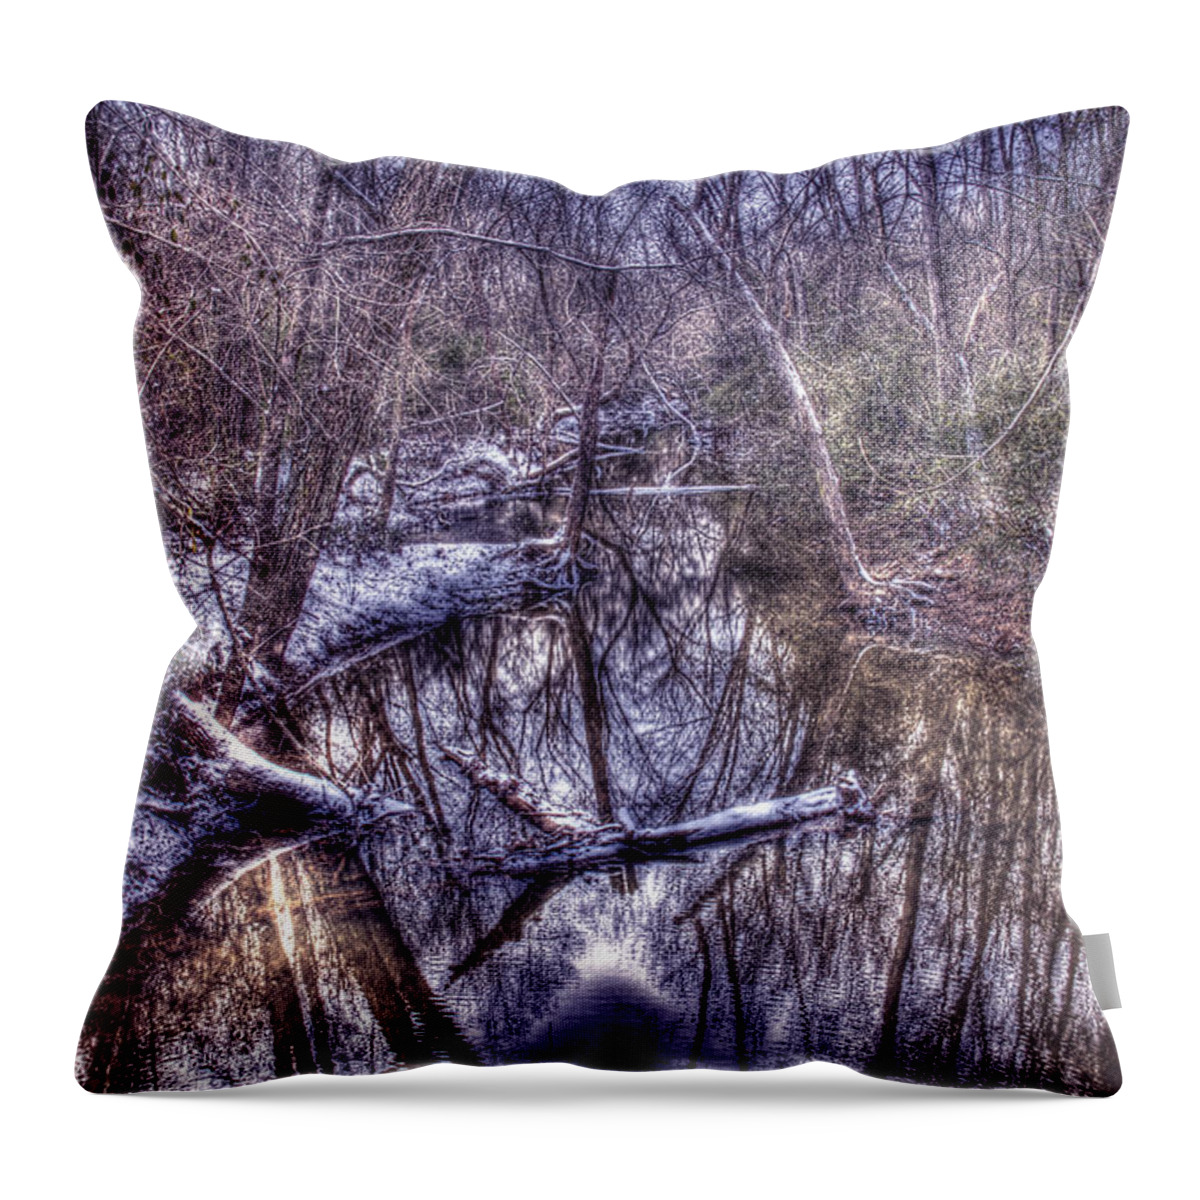 Snow Throw Pillow featuring the photograph Winter Stream by Andy Lawless